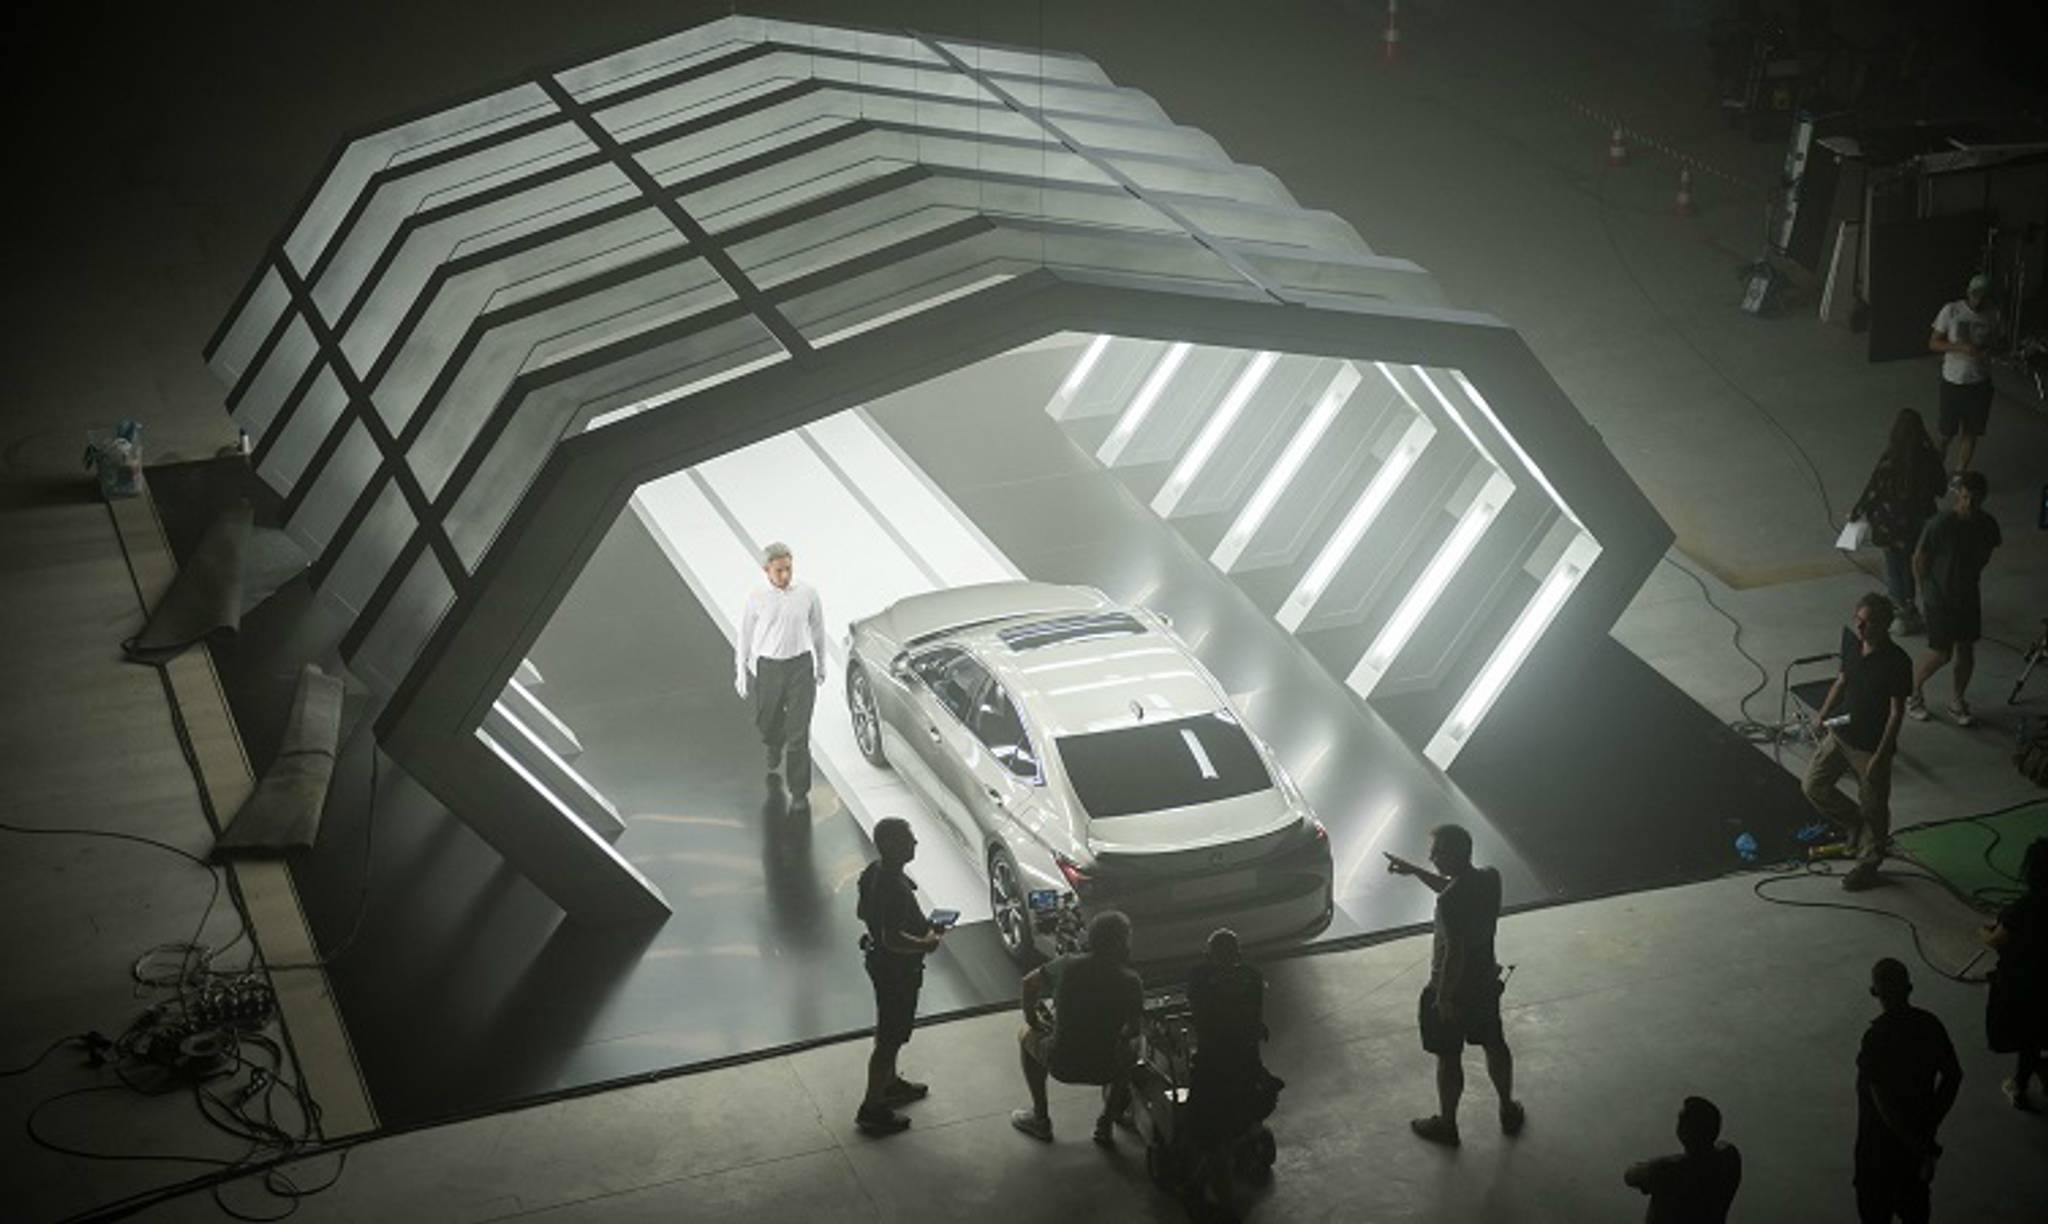 Lexus’ AI ad challenges tech's role in creativity